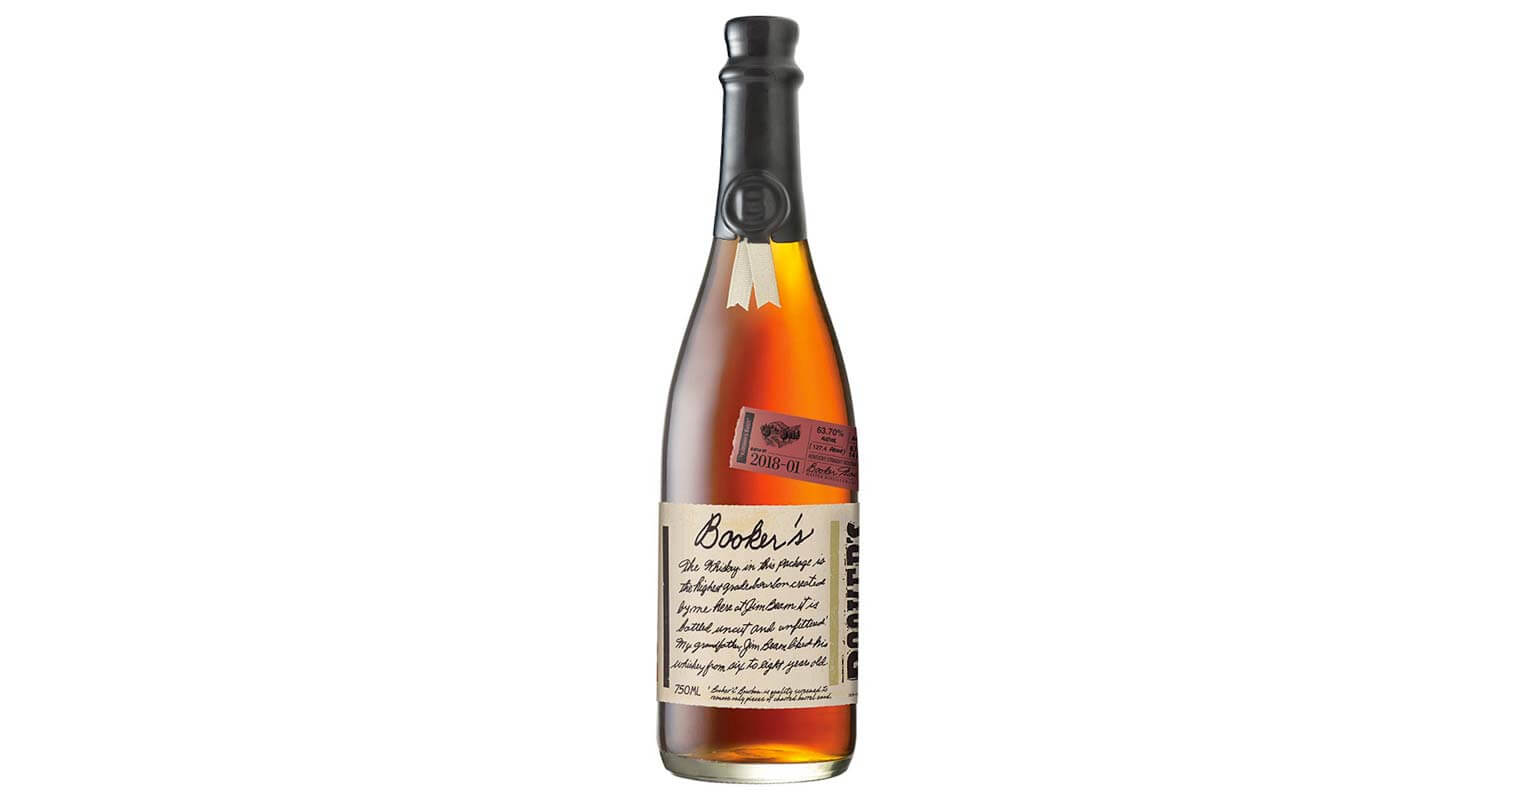 Booker’s “Kathleen’s Batch”, bottle on white, featured image